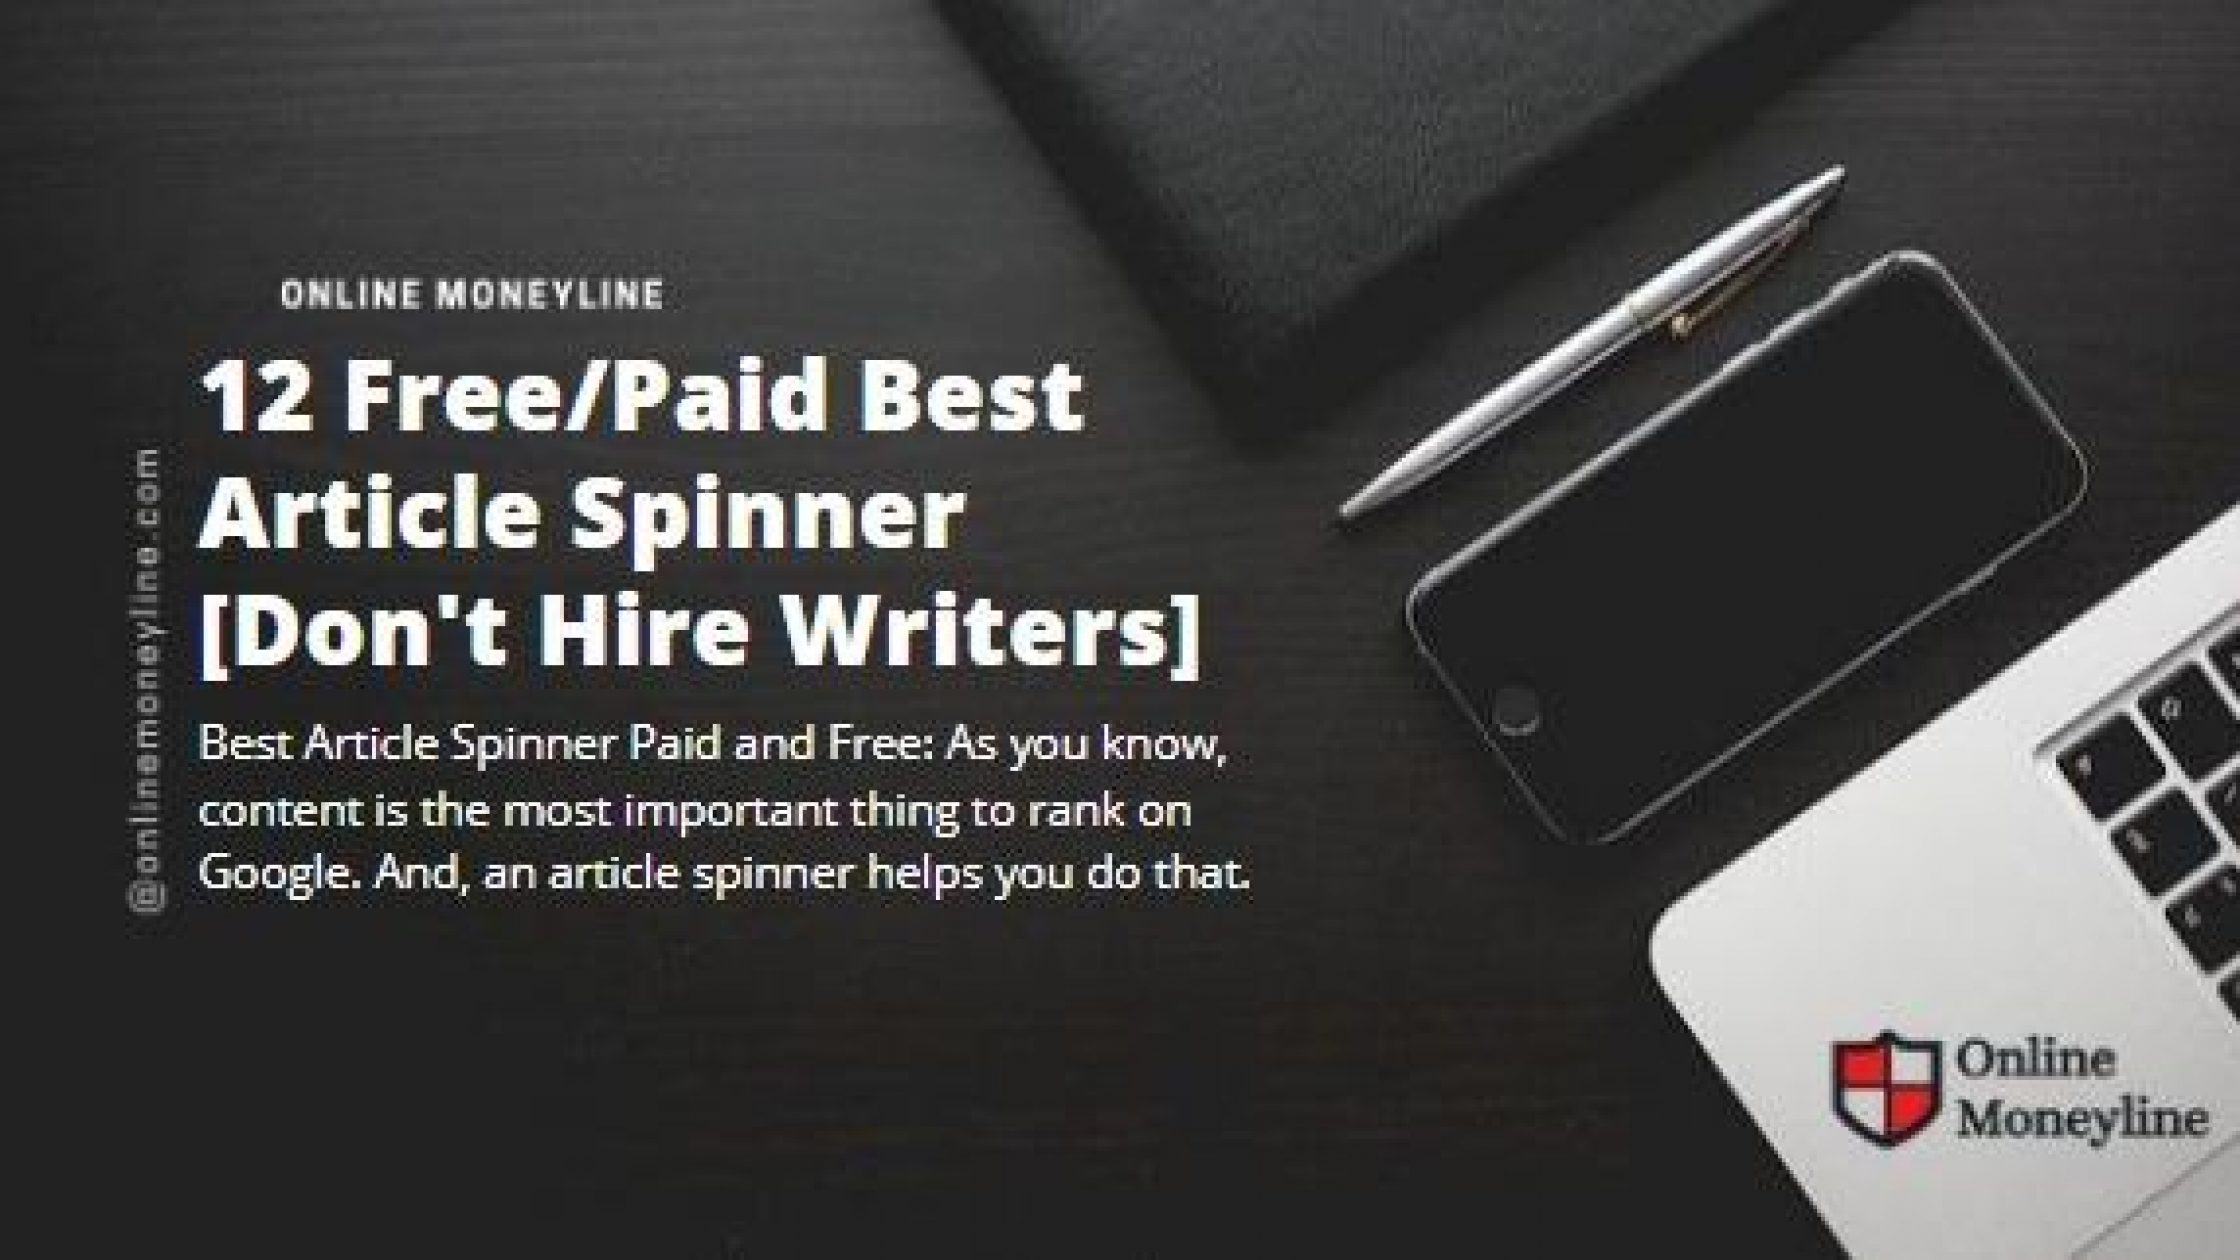 12 Free/Paid Best Article Spinner [Don’t Hire Writers]